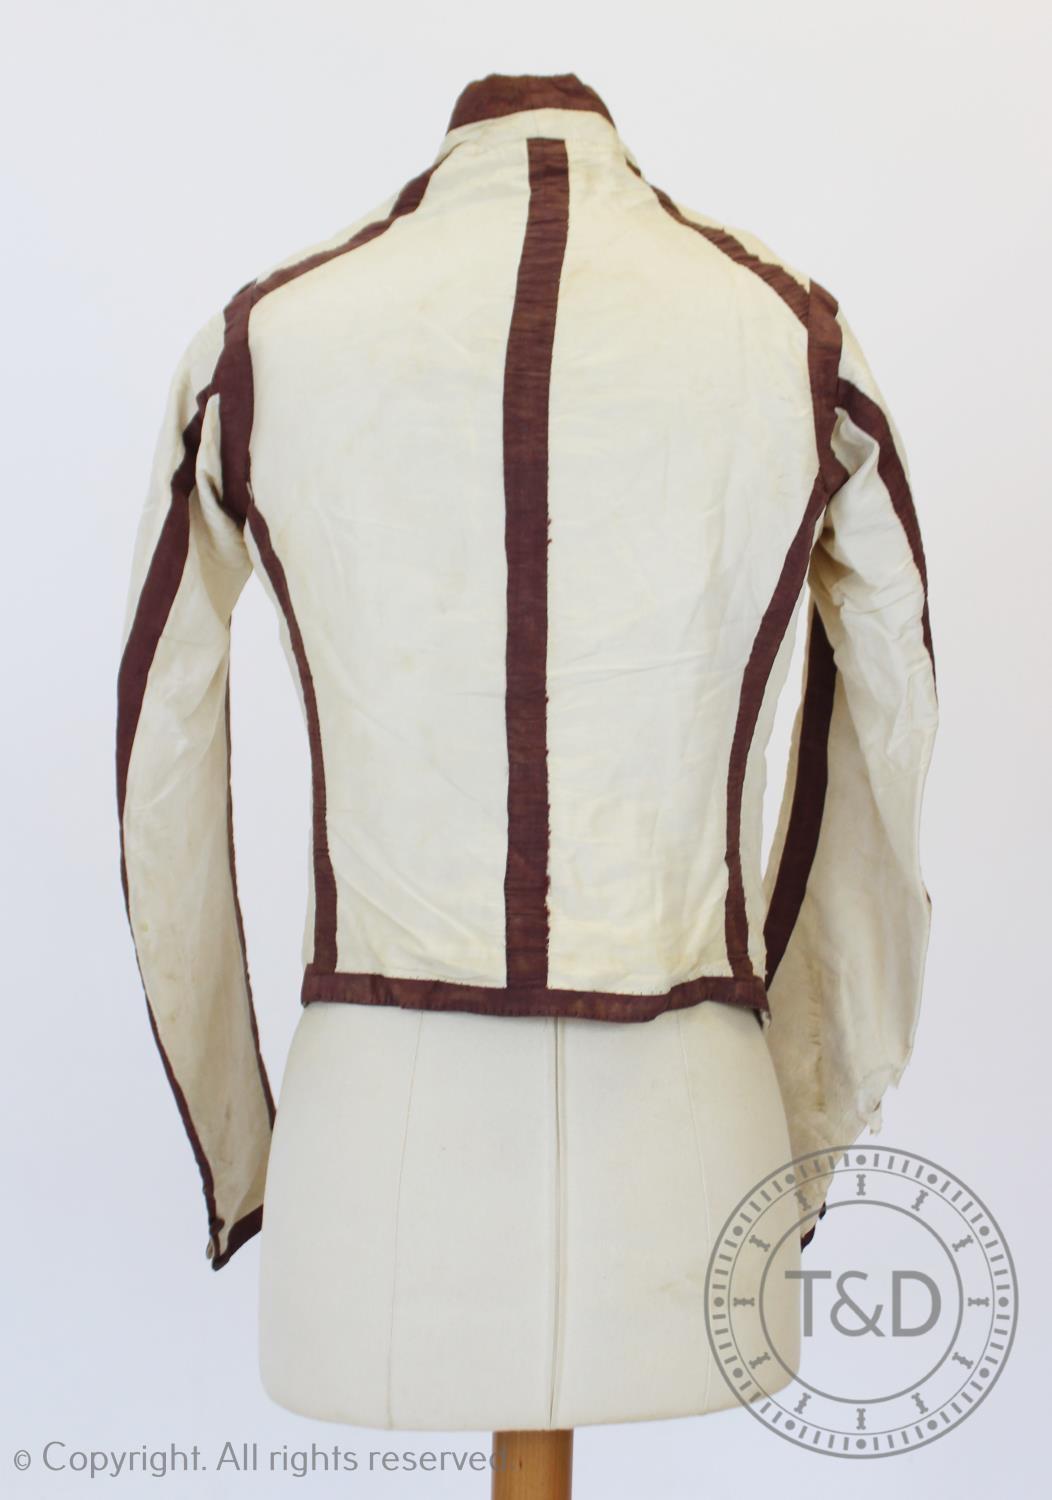 An ivory silk taffeta sleeved waistcoat or jacket, circa 1810, boldly banded and edged in dark plum, - Image 3 of 5